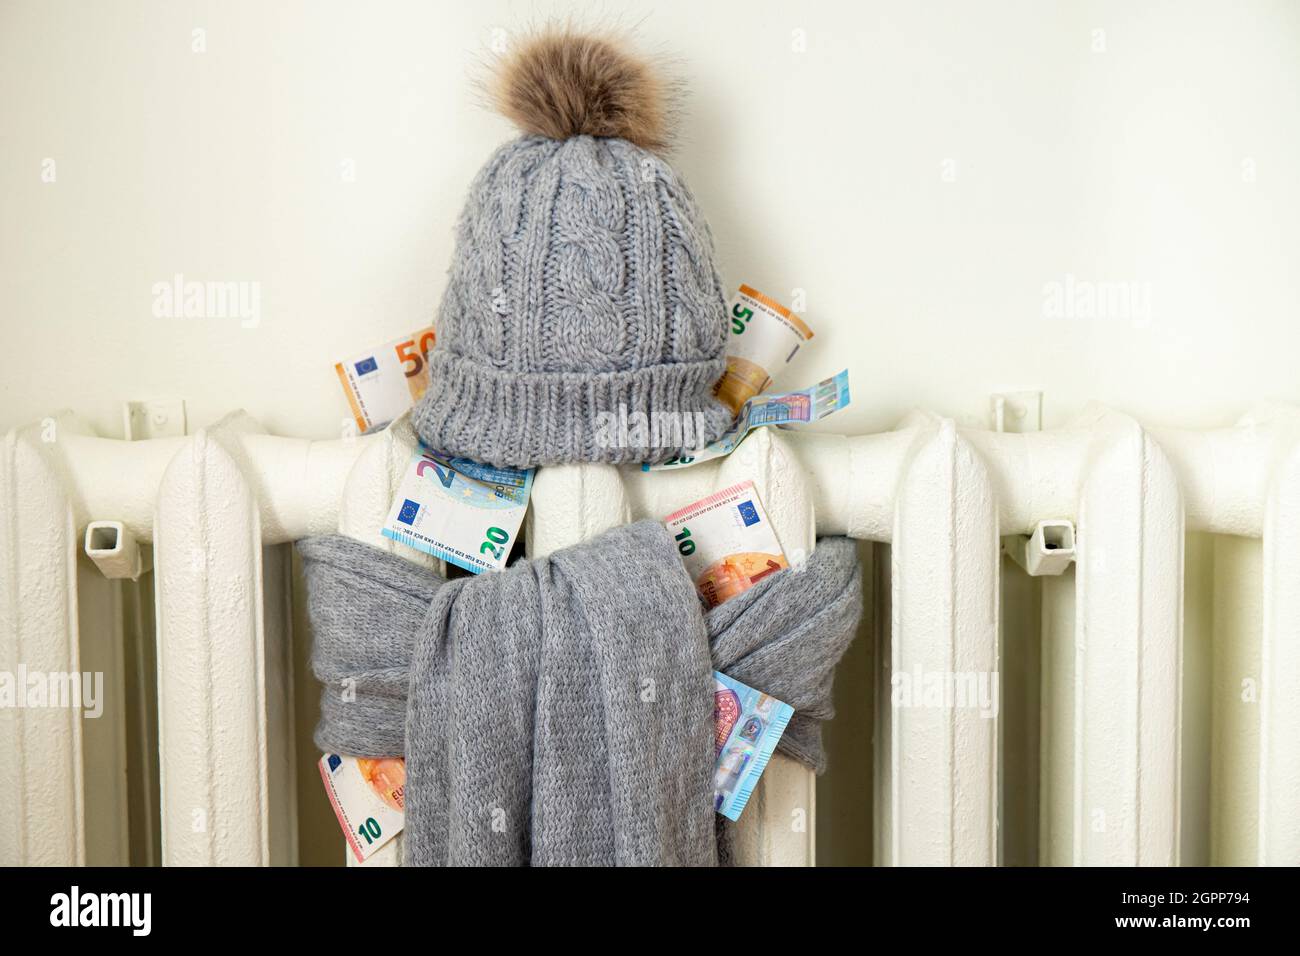 Vintage heating radiator with winter hat and scarf stuffed with euro money. The electricity bill goes up, European energy crisis concept. Stock Photo